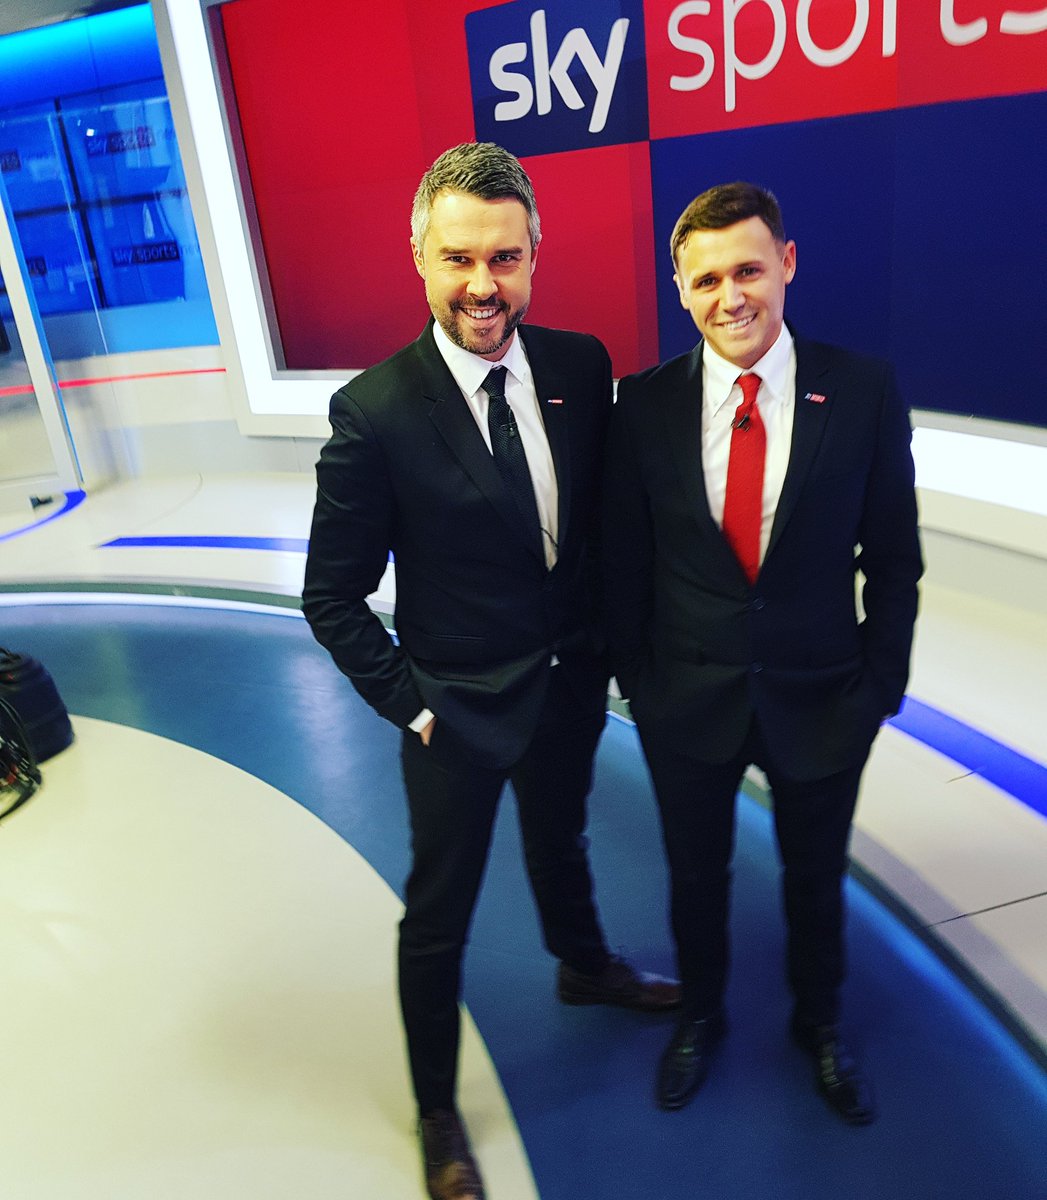 Pete Graves on Twitter: "#NUFC and #SAFC were side by side on  @SkySportsNews today. Football rivalries cast aside as @tomwhitemedia and  me helped create some award winning #television. Now both off to